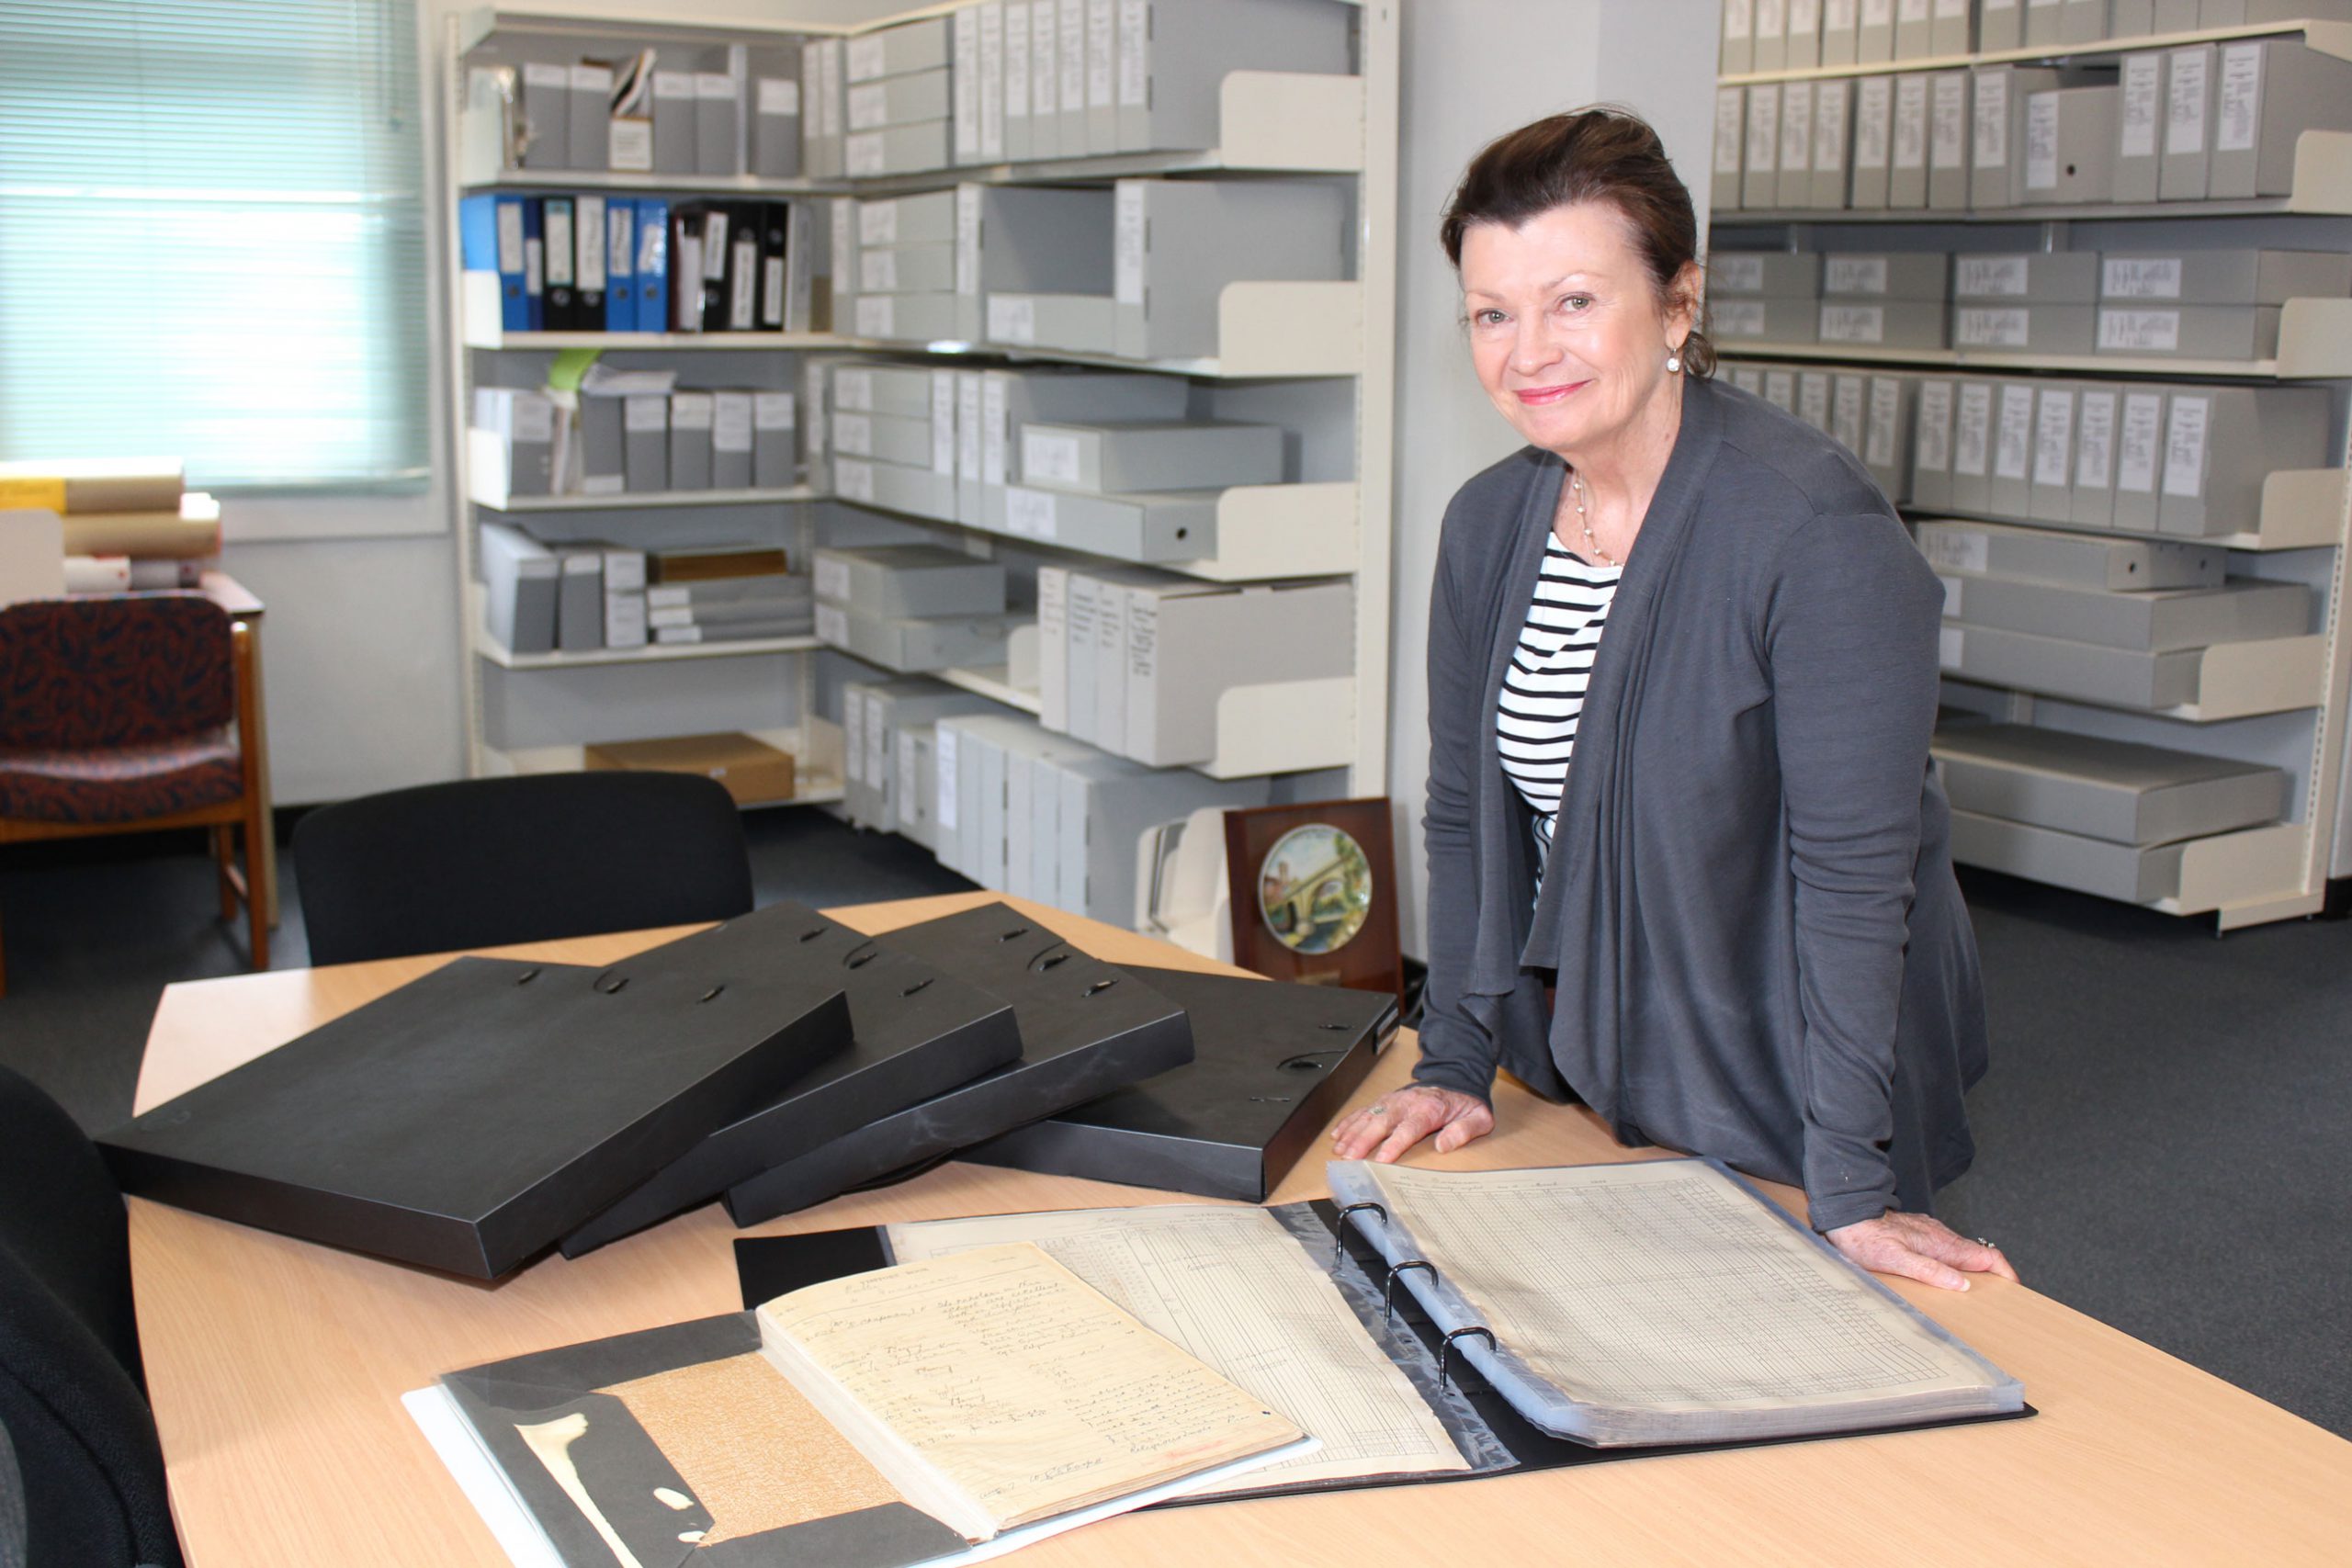 Archives Collection at Bowral Library